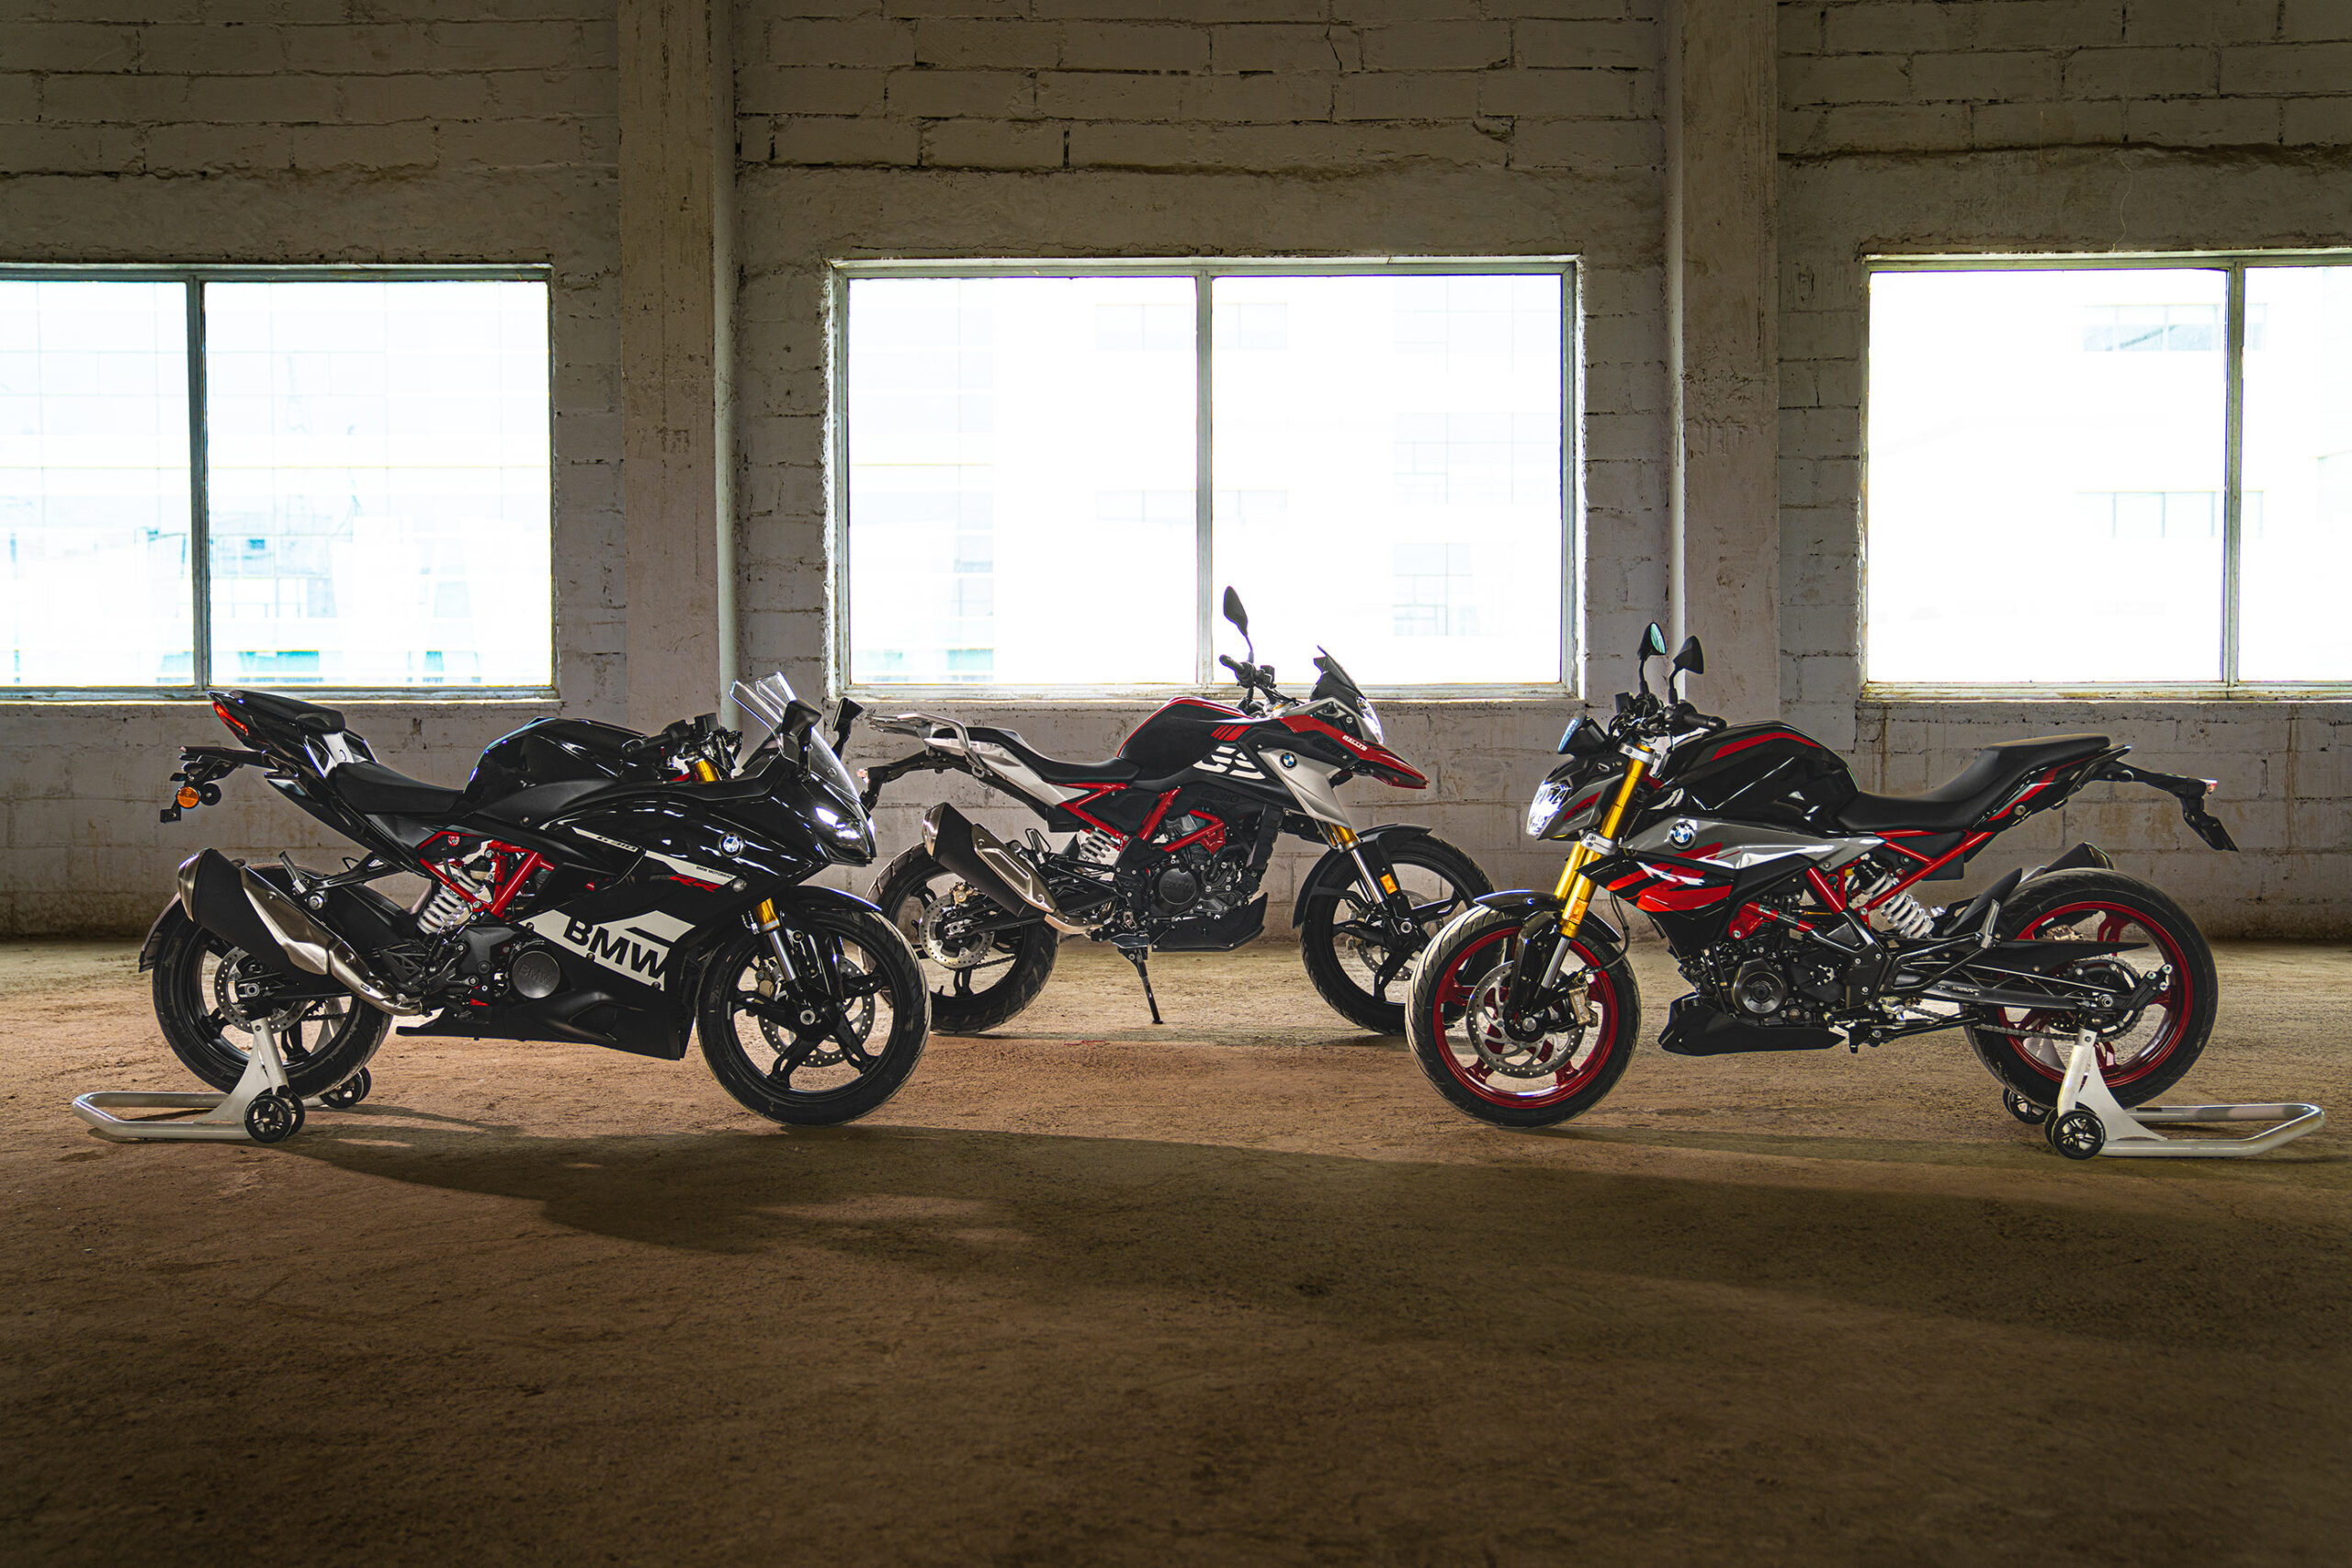 2023 BMW G 310 Motorcycle Range Updated With New Colors